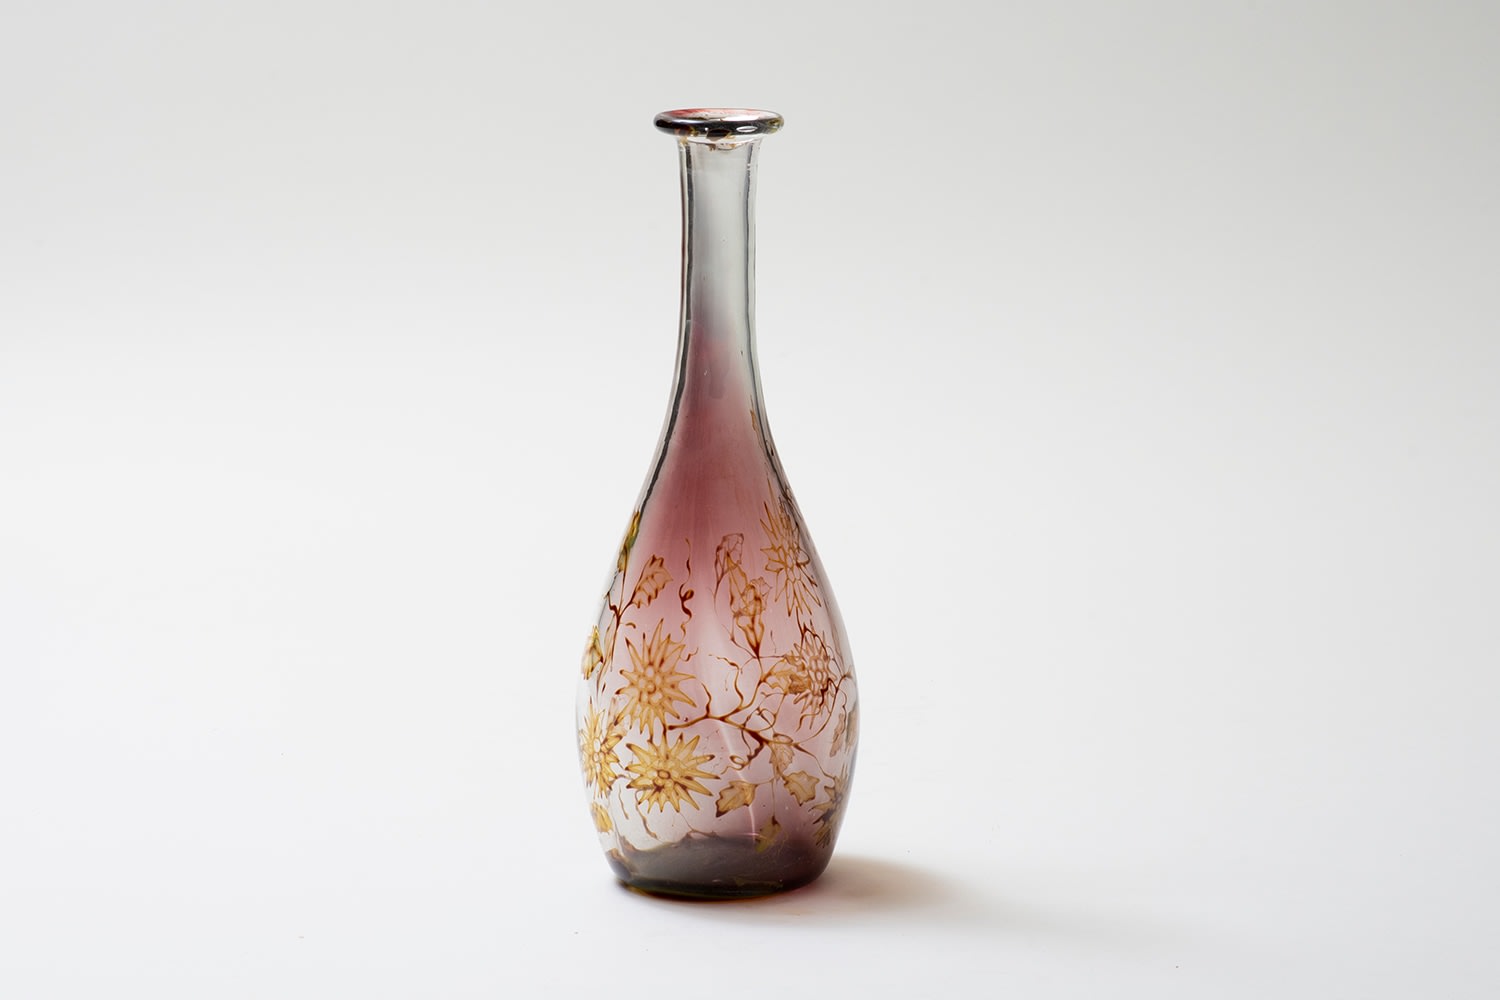 a bottle form vase in the graal technique by swedish glass company orrefors, the clear glass with sections of transparent deep purple, decorated with a motif of golden flowers and leaves